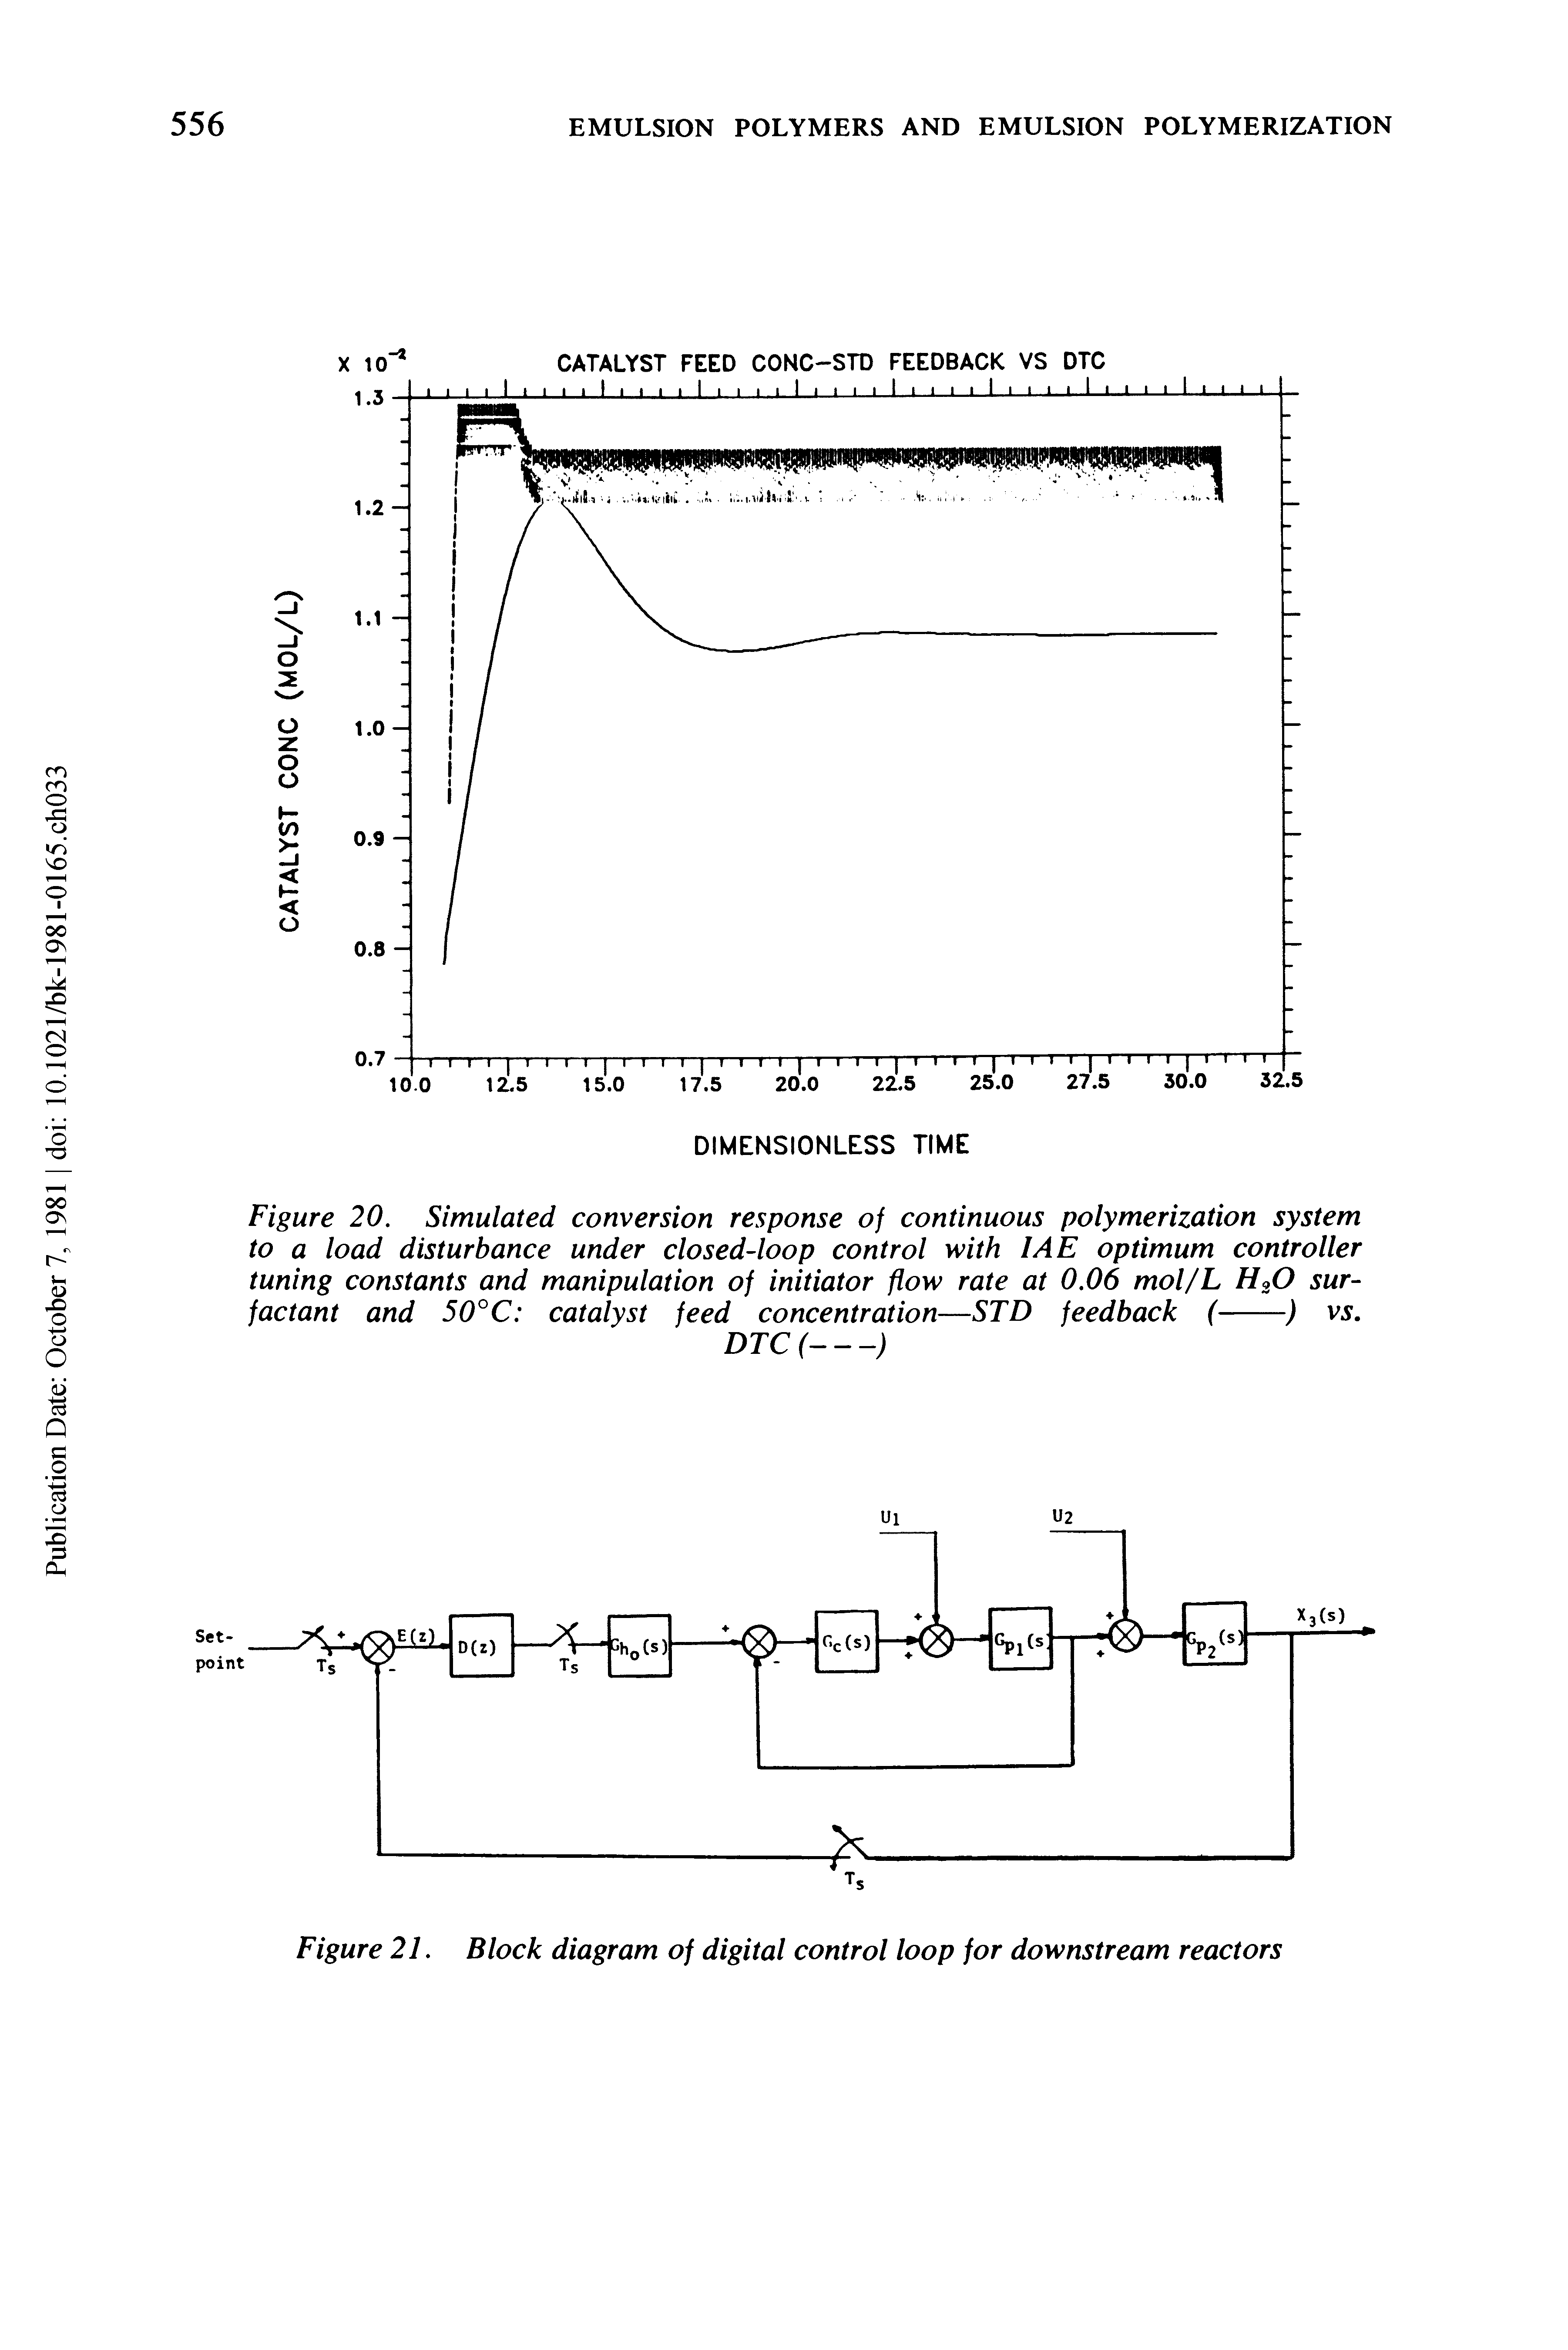 Figure 20. Simulated conversion response of continuous polymerization system to a load disturbance under closed-loop control with IAE optimum controller tuning constants and manipulation of initiator flow rate at 0.06 mol/L H20 surfactant and 50°C catalyst feed concentration—STD feedback (-) vs.